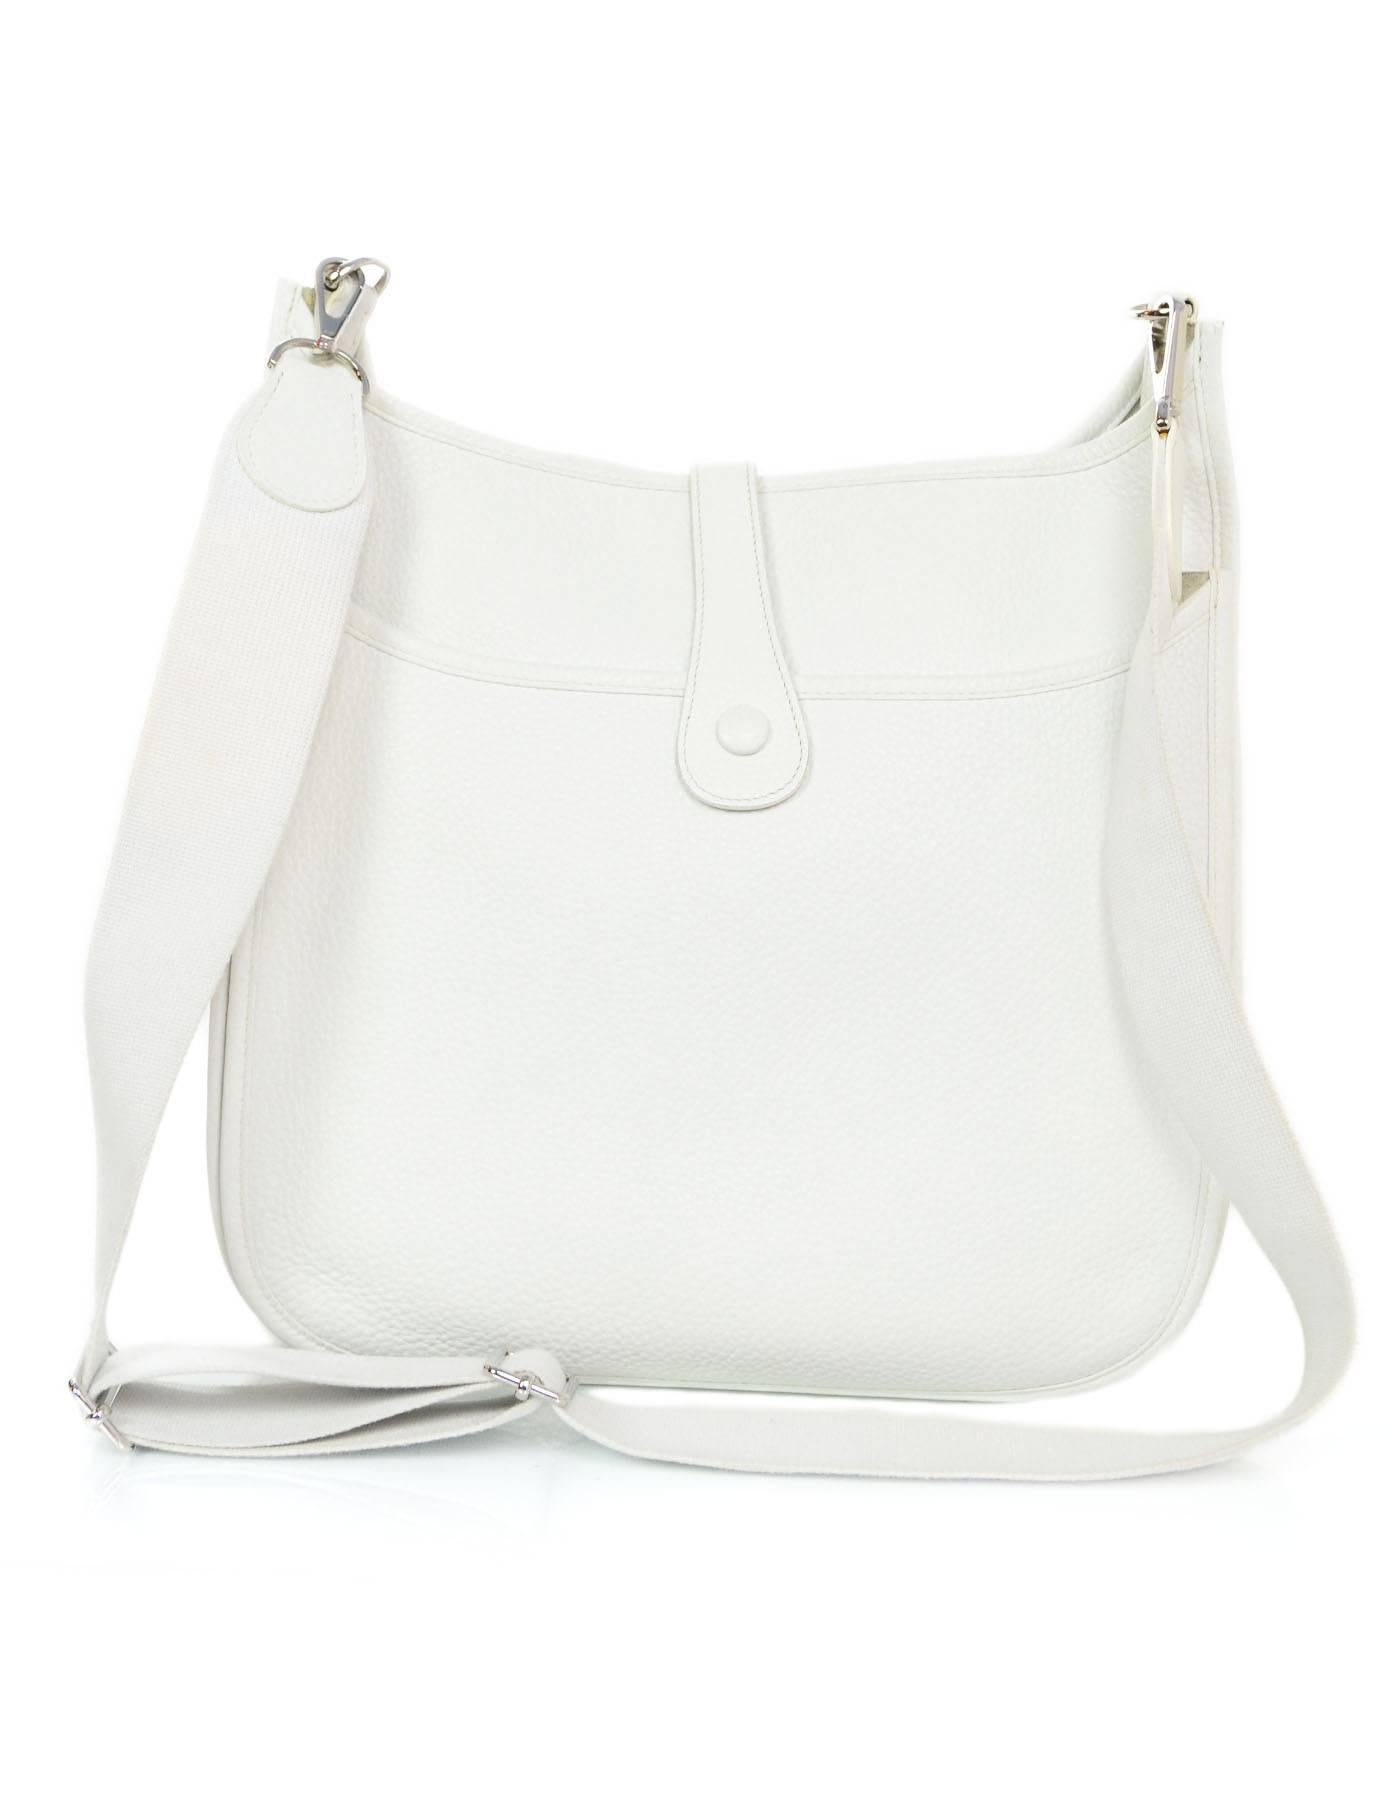 Hermes White Clemence Evelyne III GM Messenger Bag
Features perforated H logo and adjustable shoulder/crossbody strap

Made In: France
Year of Production: 2009
Color: White
Hardware: Palladium
Materials: Clemence leather
Lining: